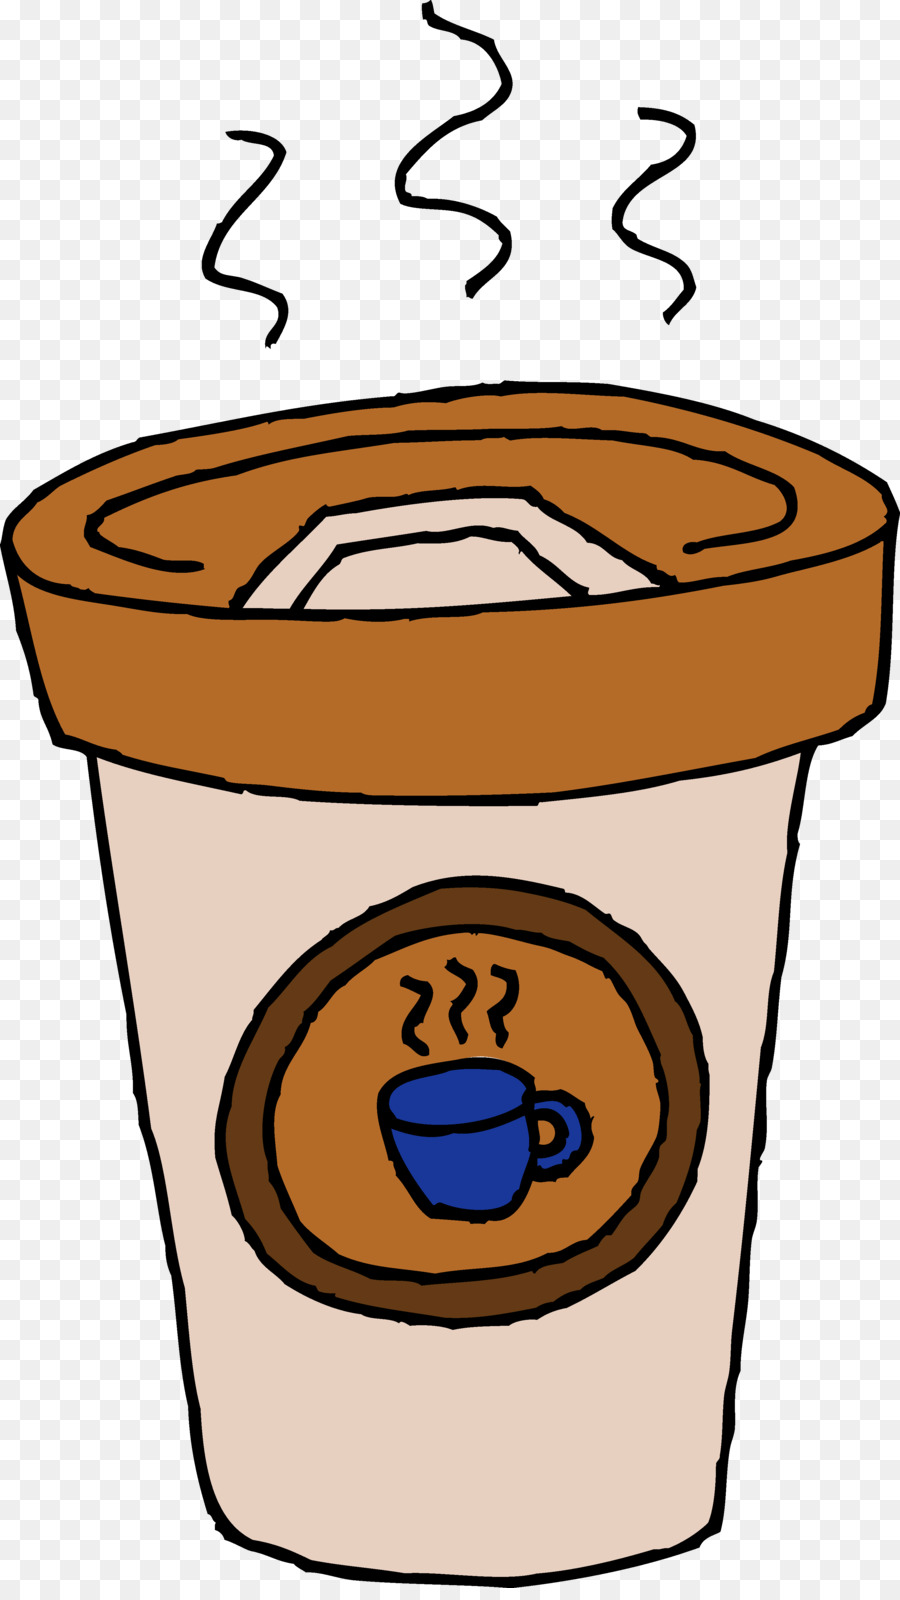 Coffee milk Latte Coffee cup Clip art - Free Coffee Cup Clipart png download - 3162*5578 - Free Transparent Coffee png Download.